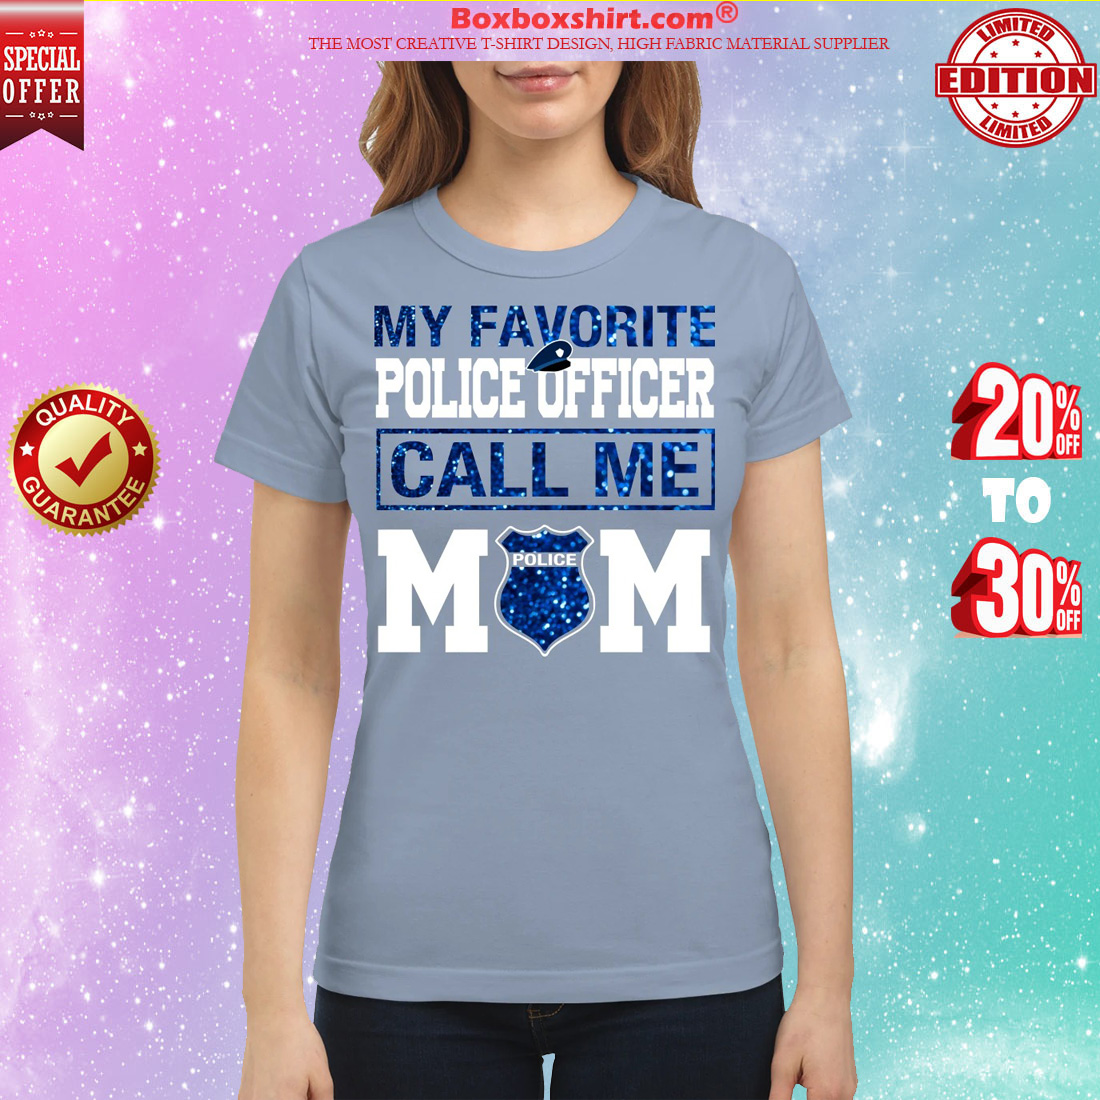 My favorite officer call me mom classic shirt